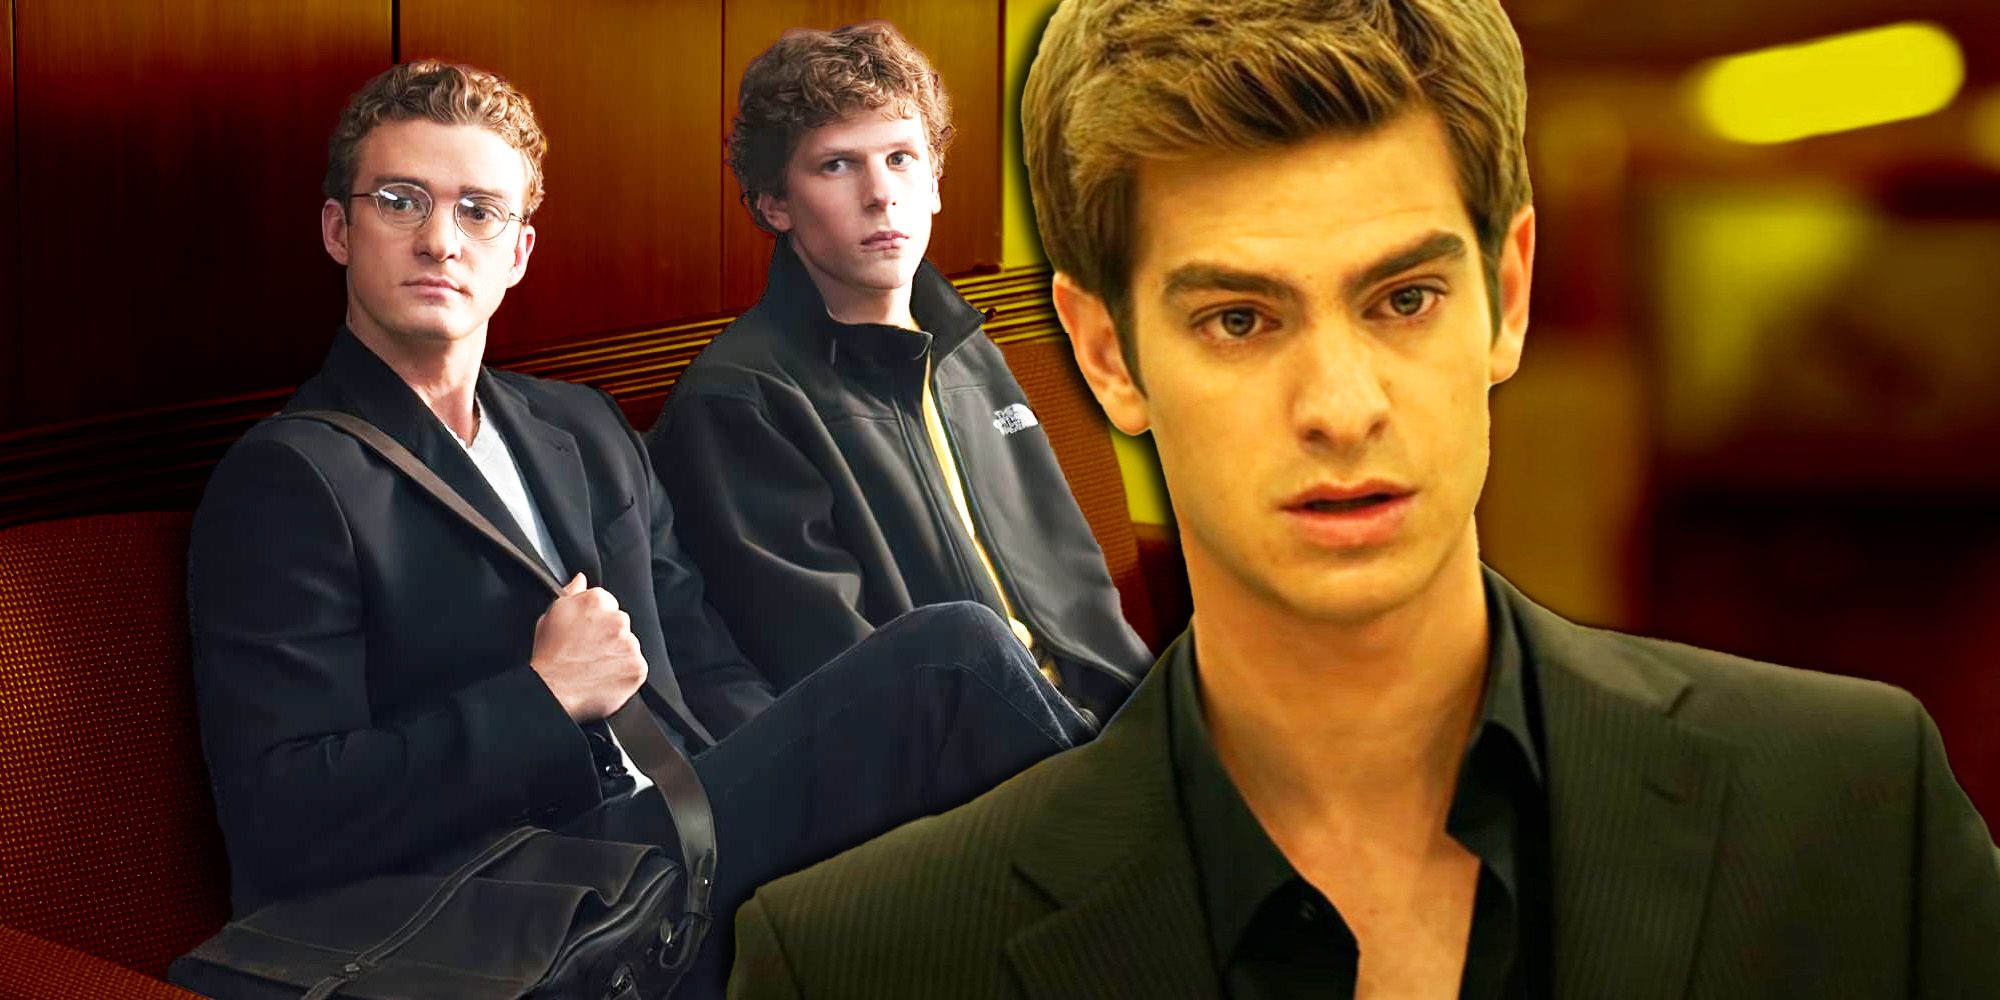 The Social Network 2 Could Be Incredible But It Can't Now After Facebook's Last 13 Years